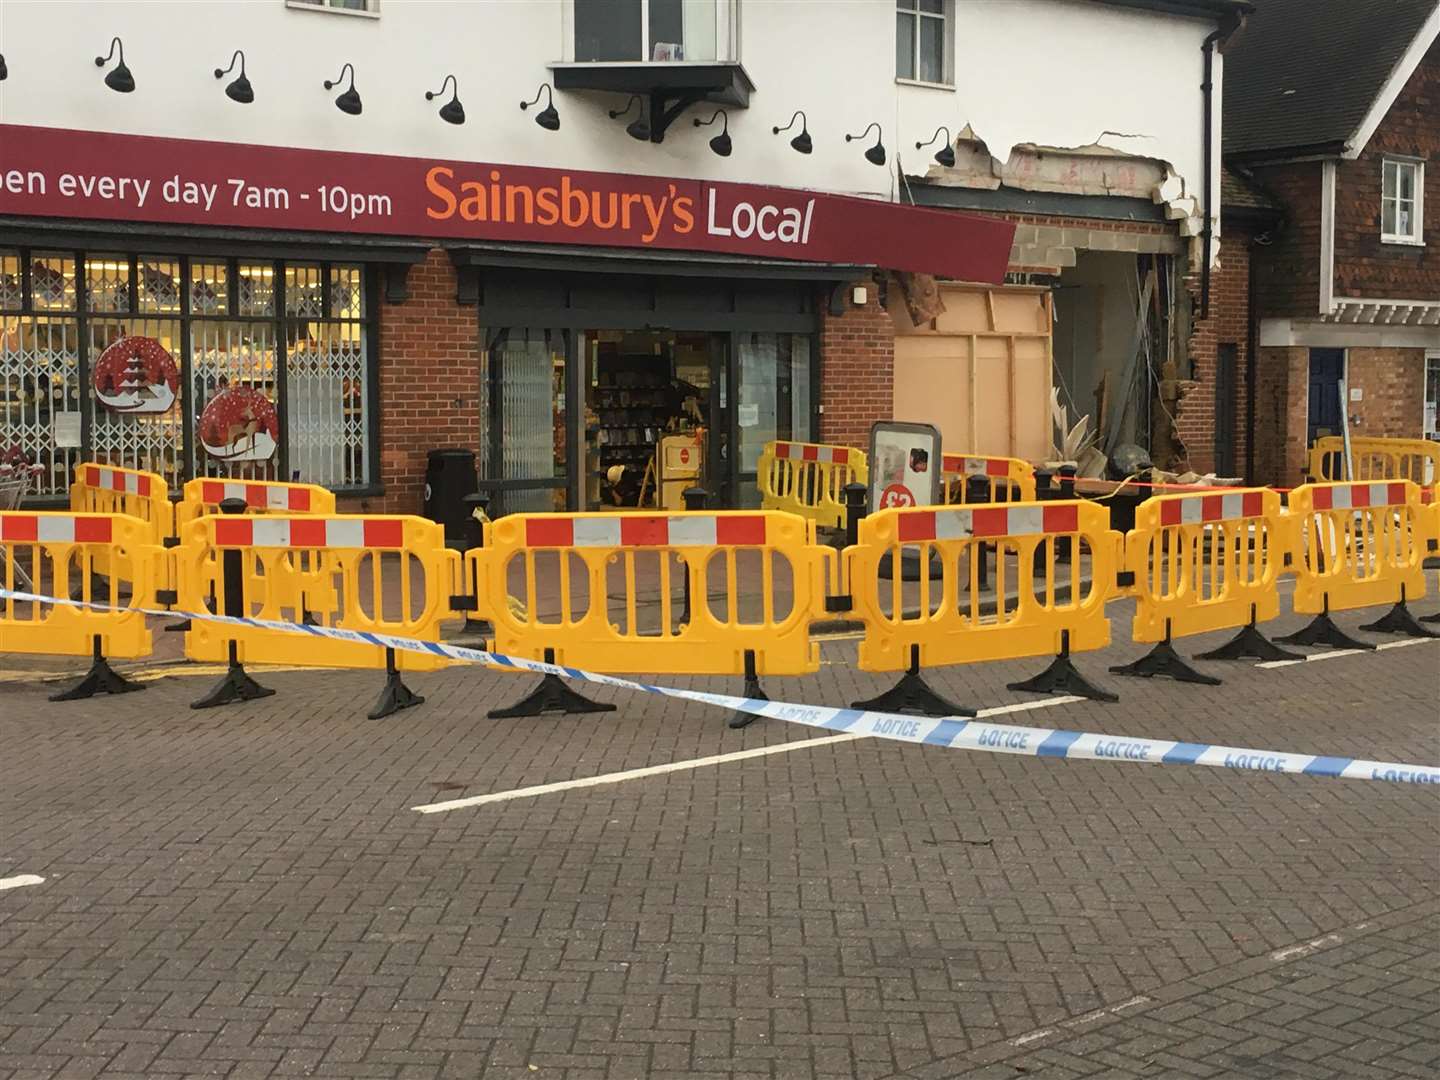 Photos from the scene of a cash machine theft in Headcorn High Street